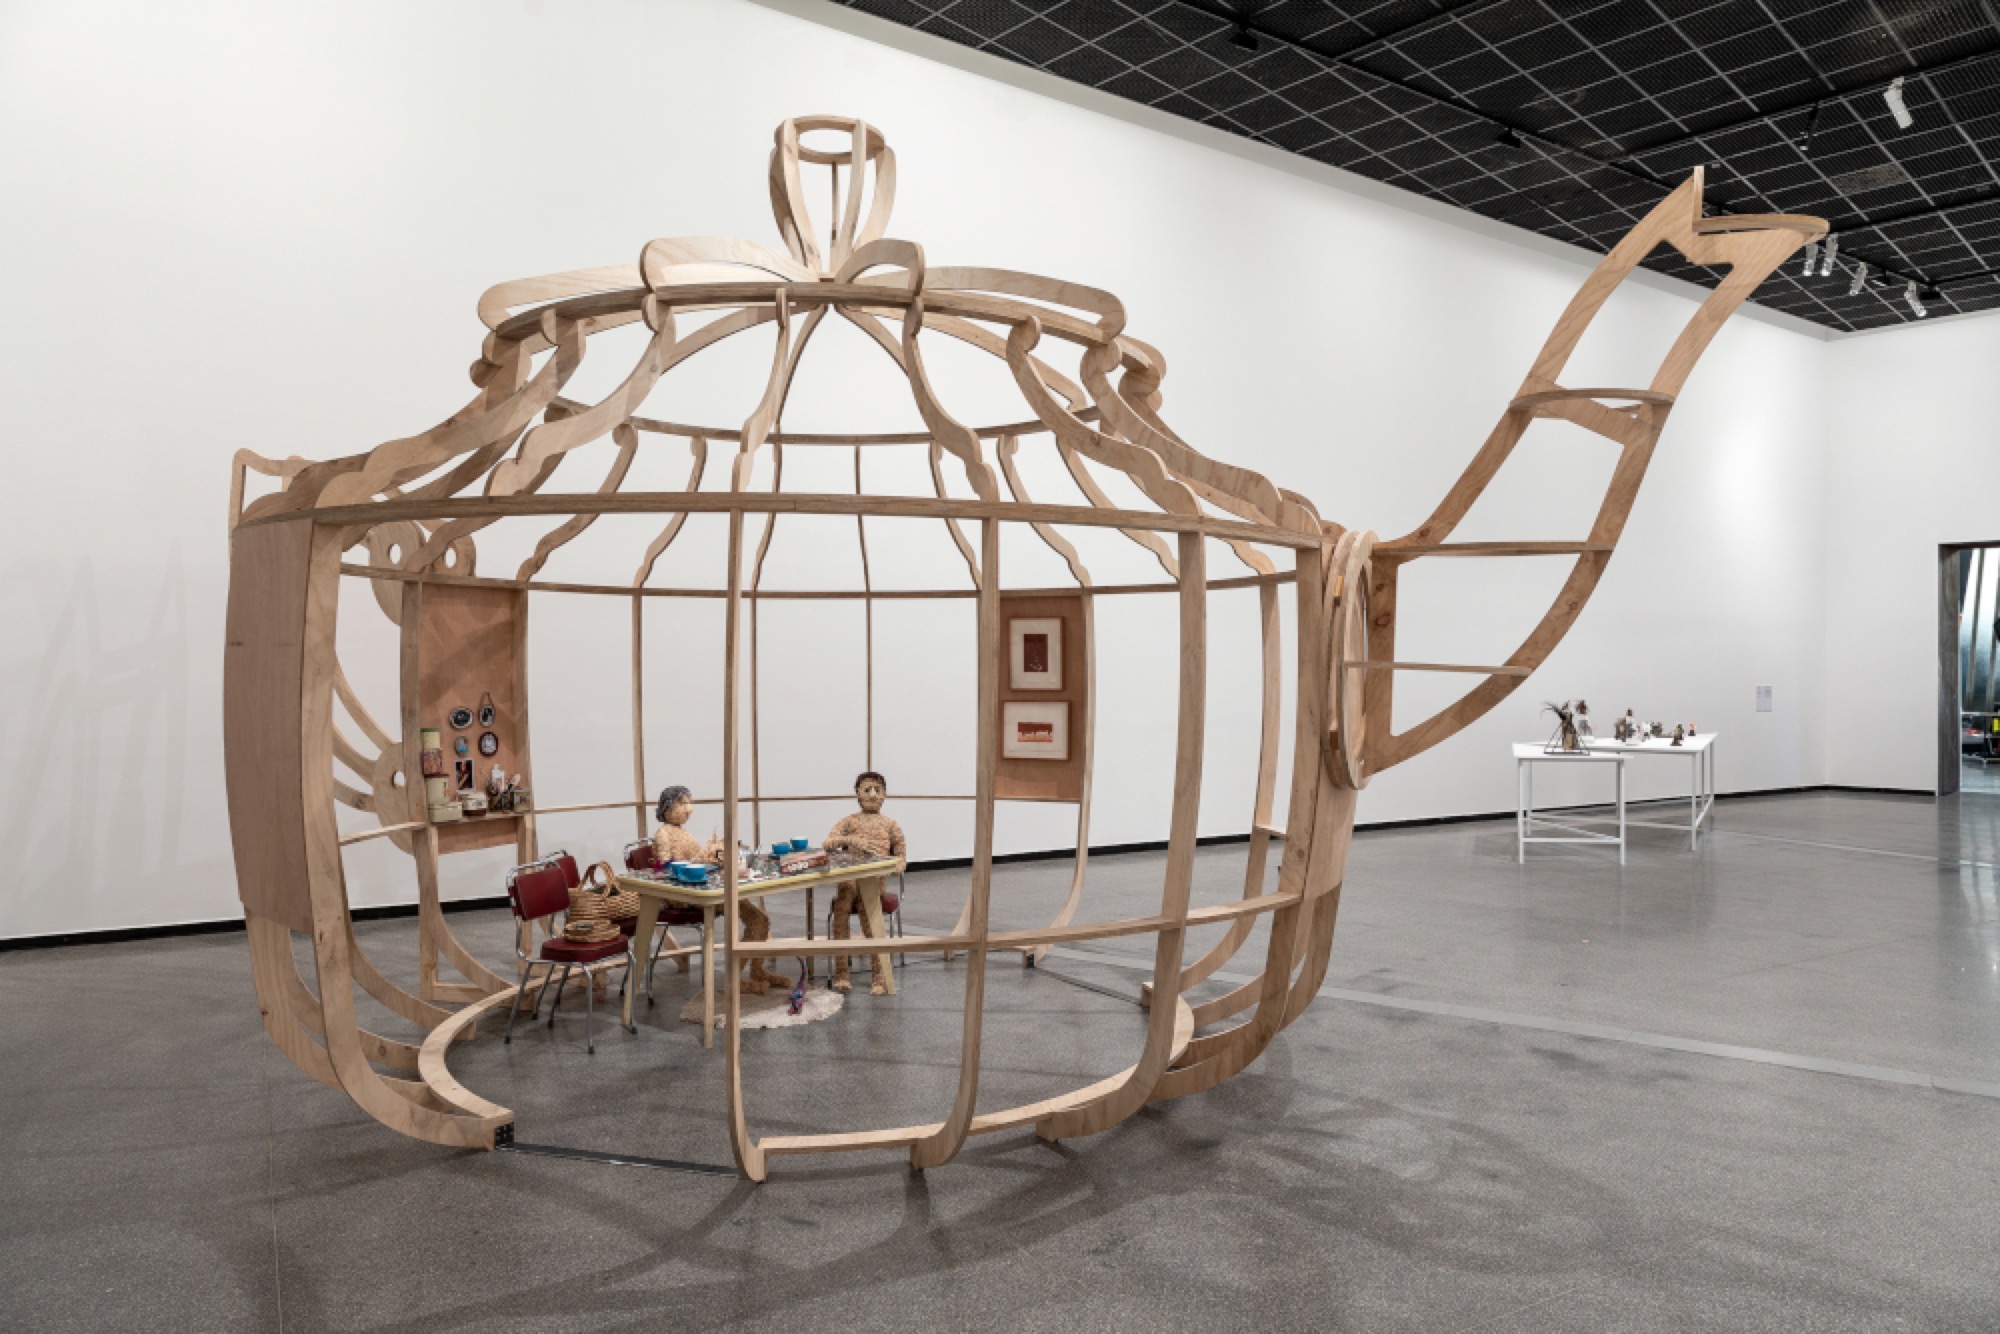 Vicki Couzens, <em>Djawannacuppatea</em> 2018, plywood, kitchen table and chairs, lamp, woven woollen matt, woven framed photographs, anodised aluminium teapot, personal collections, sound, 443.5 x 840.0 x 505.0 cm, installation view, Australian Centre for Contemporary Art, Melbourne. Sound: Robbie Bundle. Courtesy the artist. Photograph: Andrew Curtis.